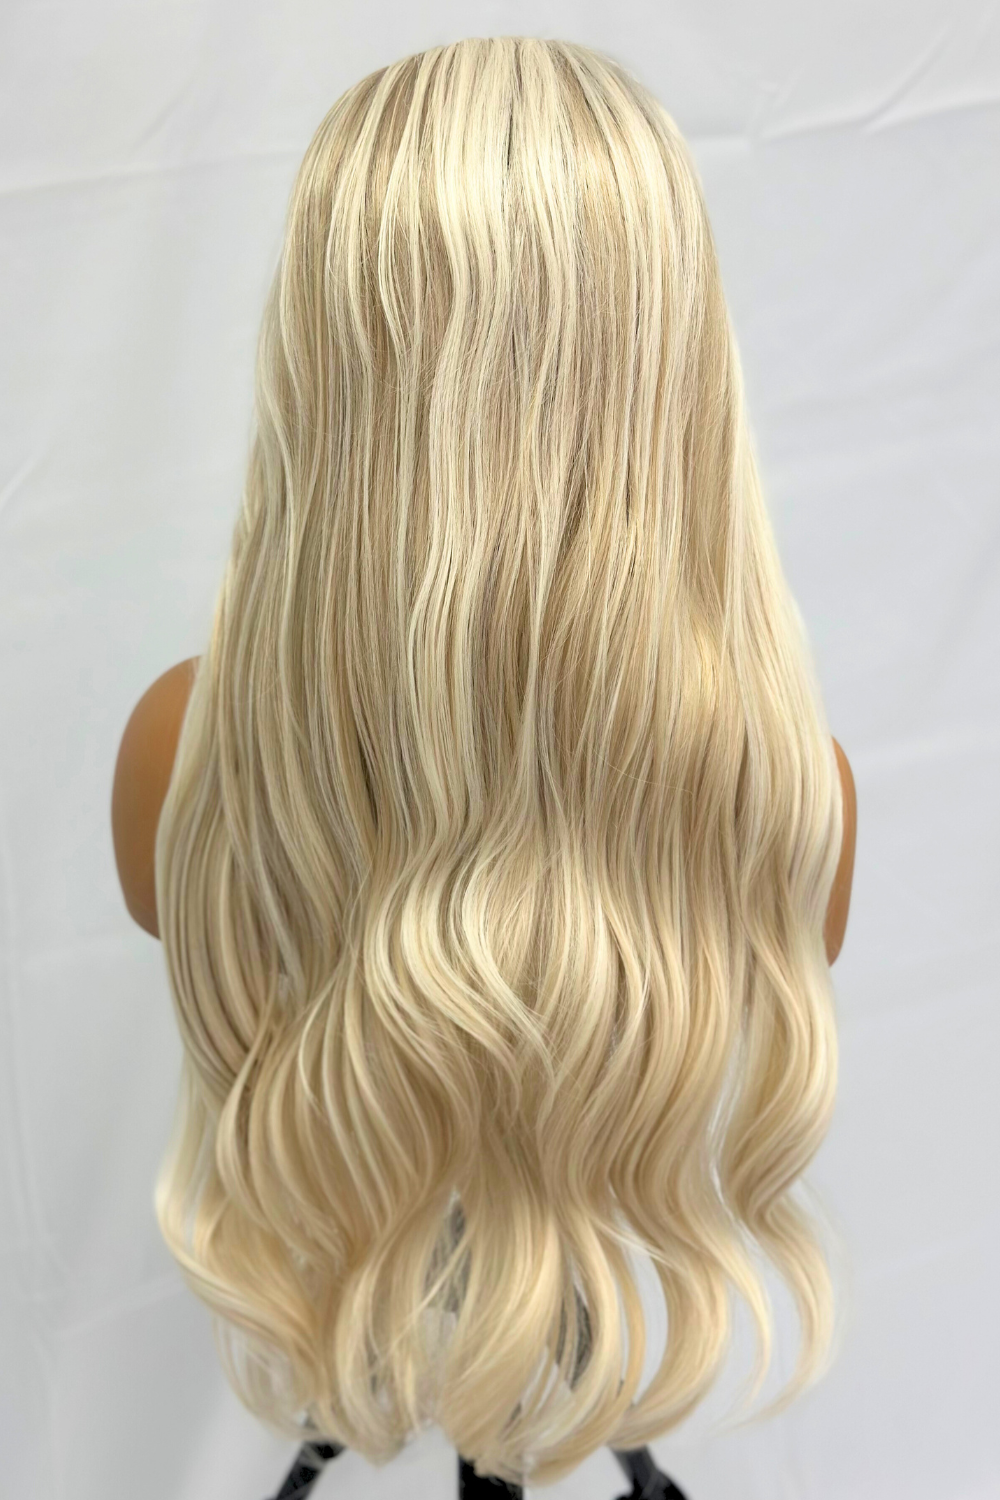 "Moonlit Mermaid" | Synthetic Lace Front Wig | Long Wavy Dark Root to Blonde Ombre Wig